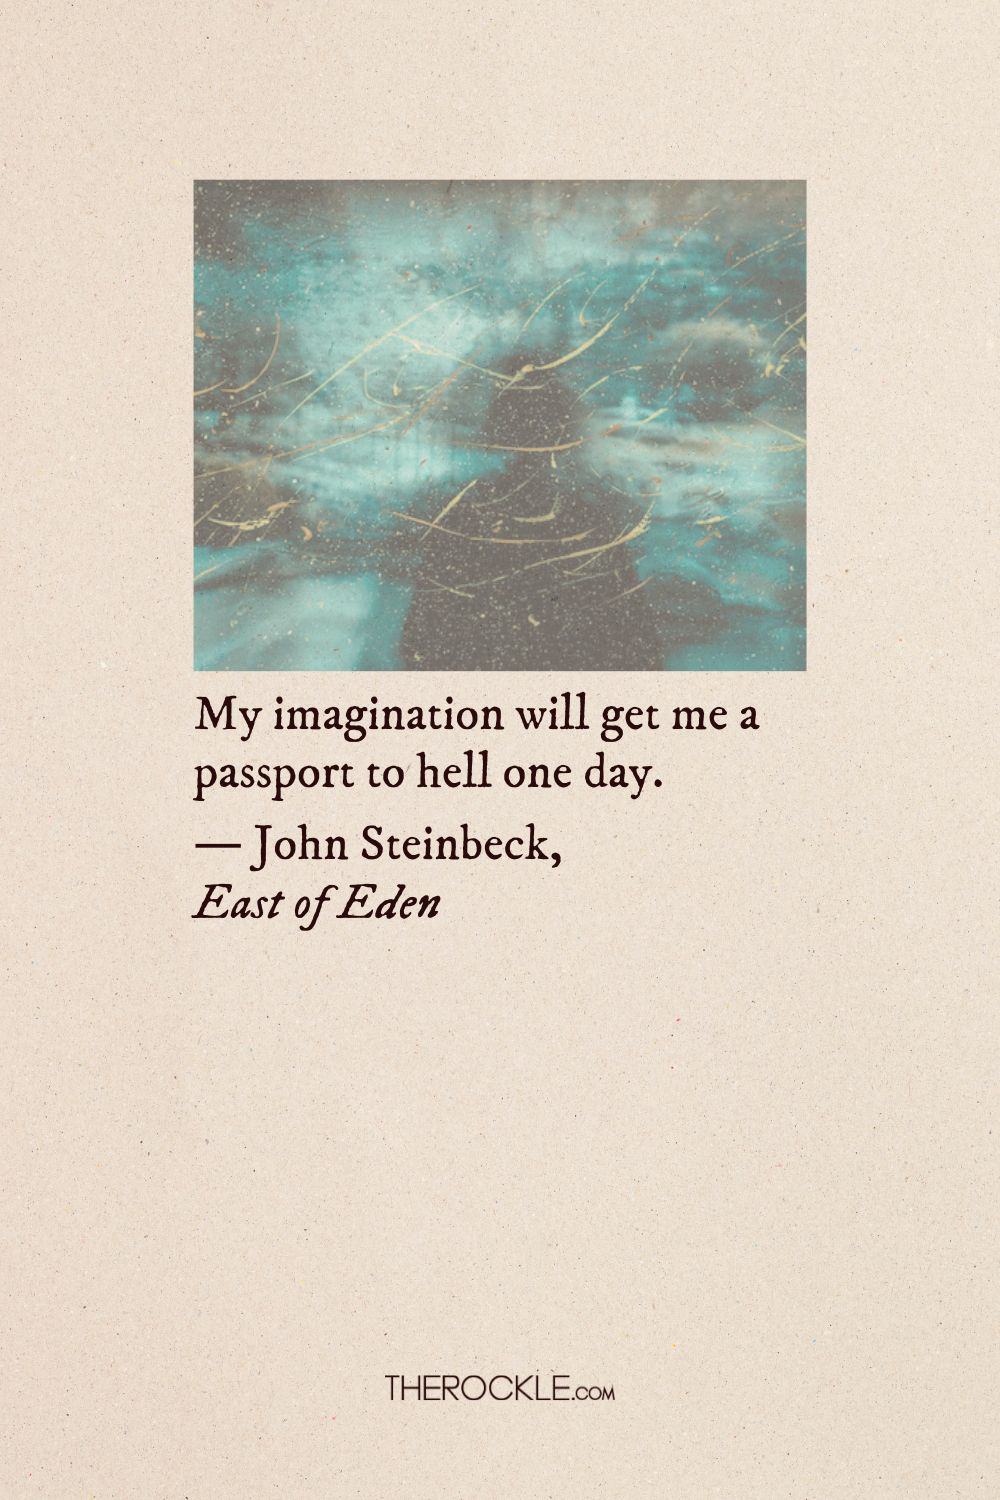 Steinbeck's quote about imagination